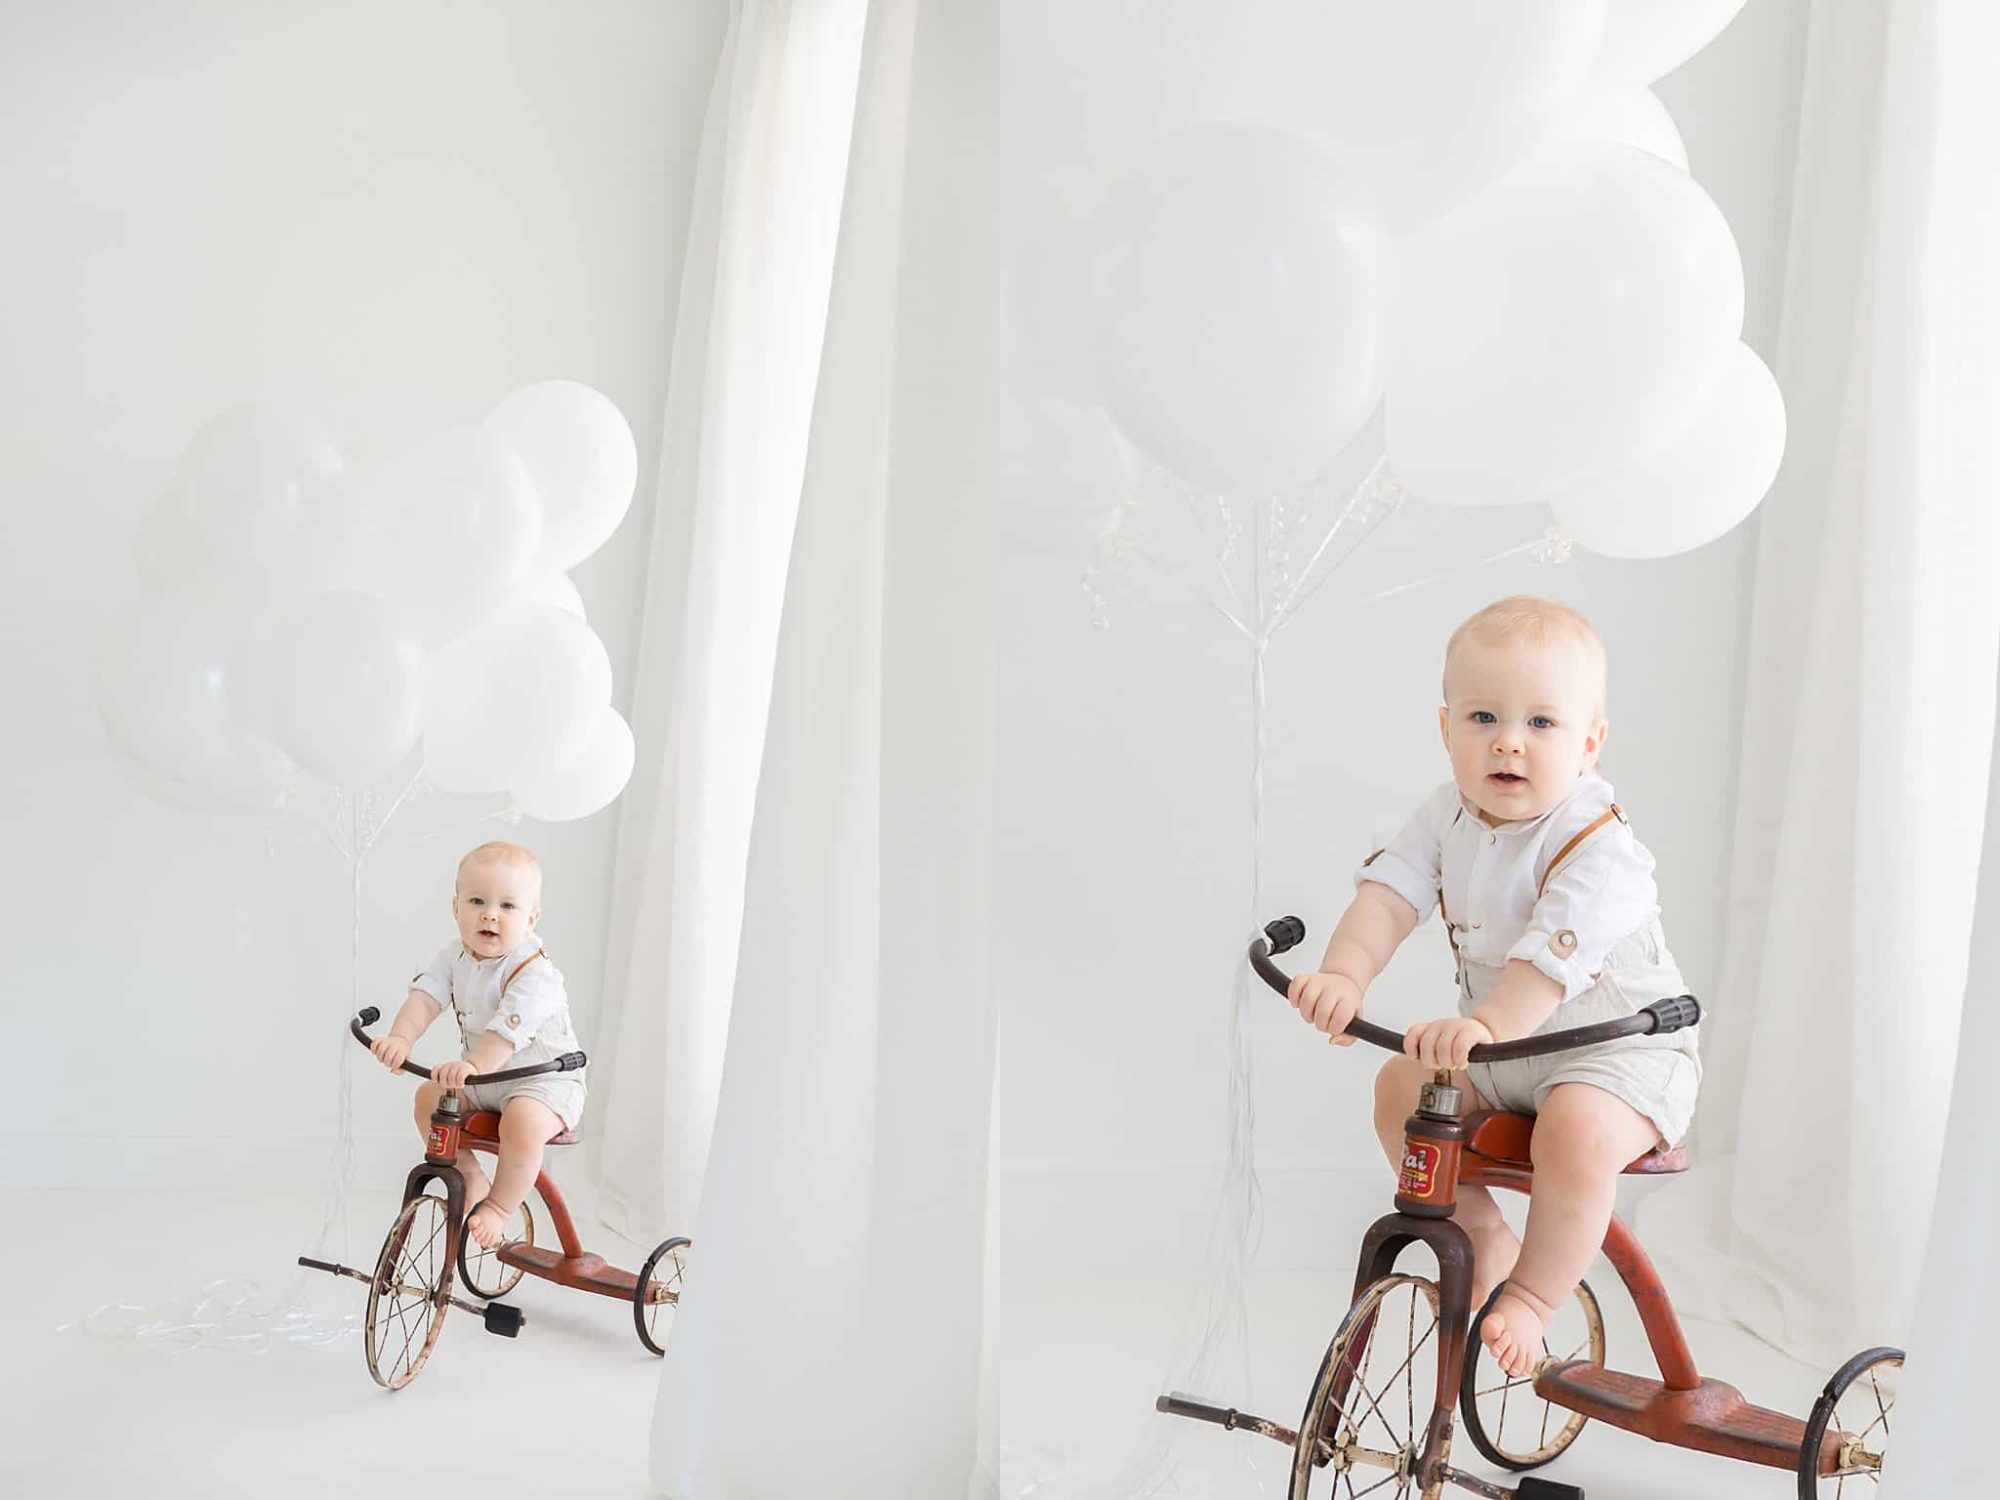 Birthday boy sitting on tricycle with white balloons tied to handle.